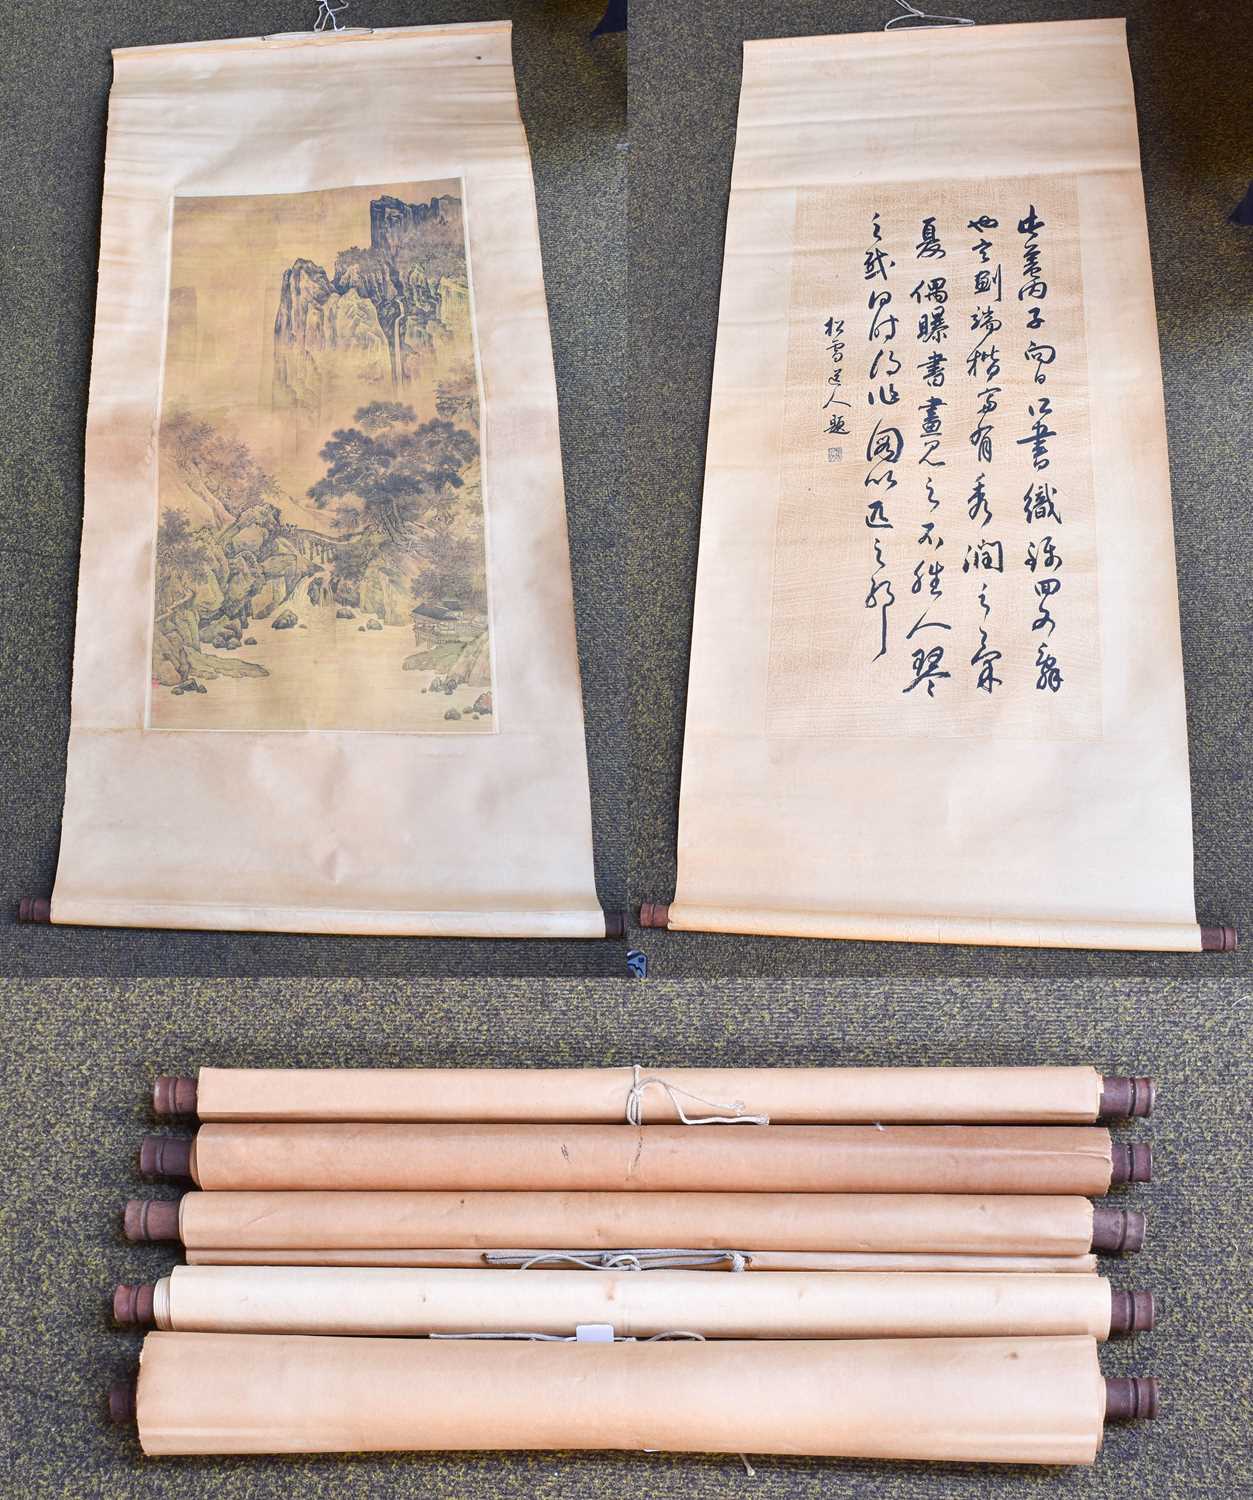 Lot 284 - Five Chinese Caligraphy Scrolls, 20th century